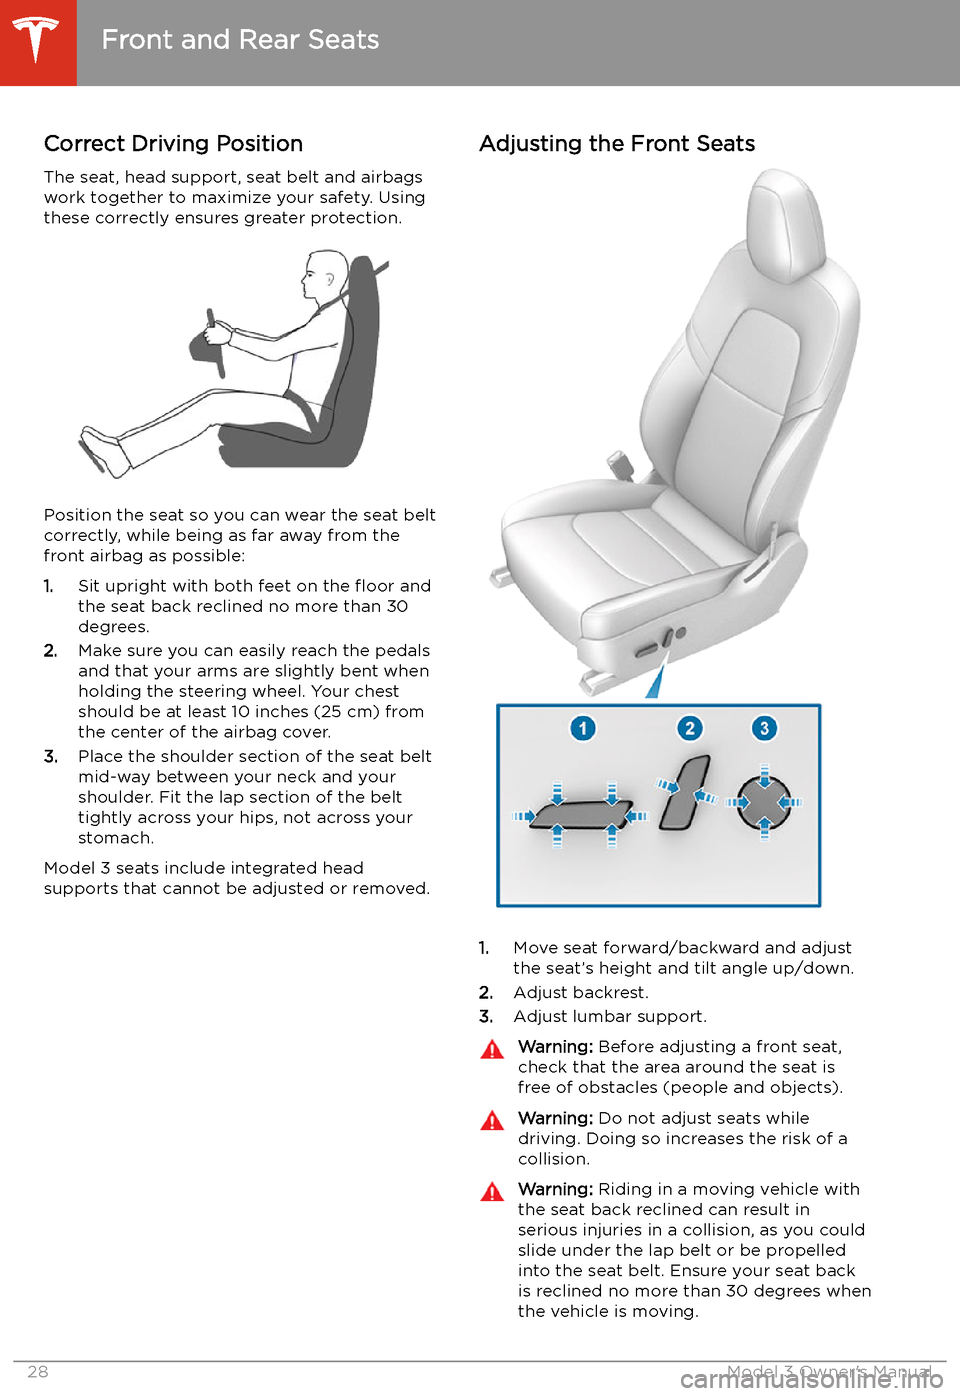 TESLA MODEL 3 2020  Owners Manuals Seating and Safety Restraints
Front and Rear Seats
Correct Driving Position The seat, head support, seat belt and airbagswork together to maximize your safety. Using
these correctly ensures greater pr